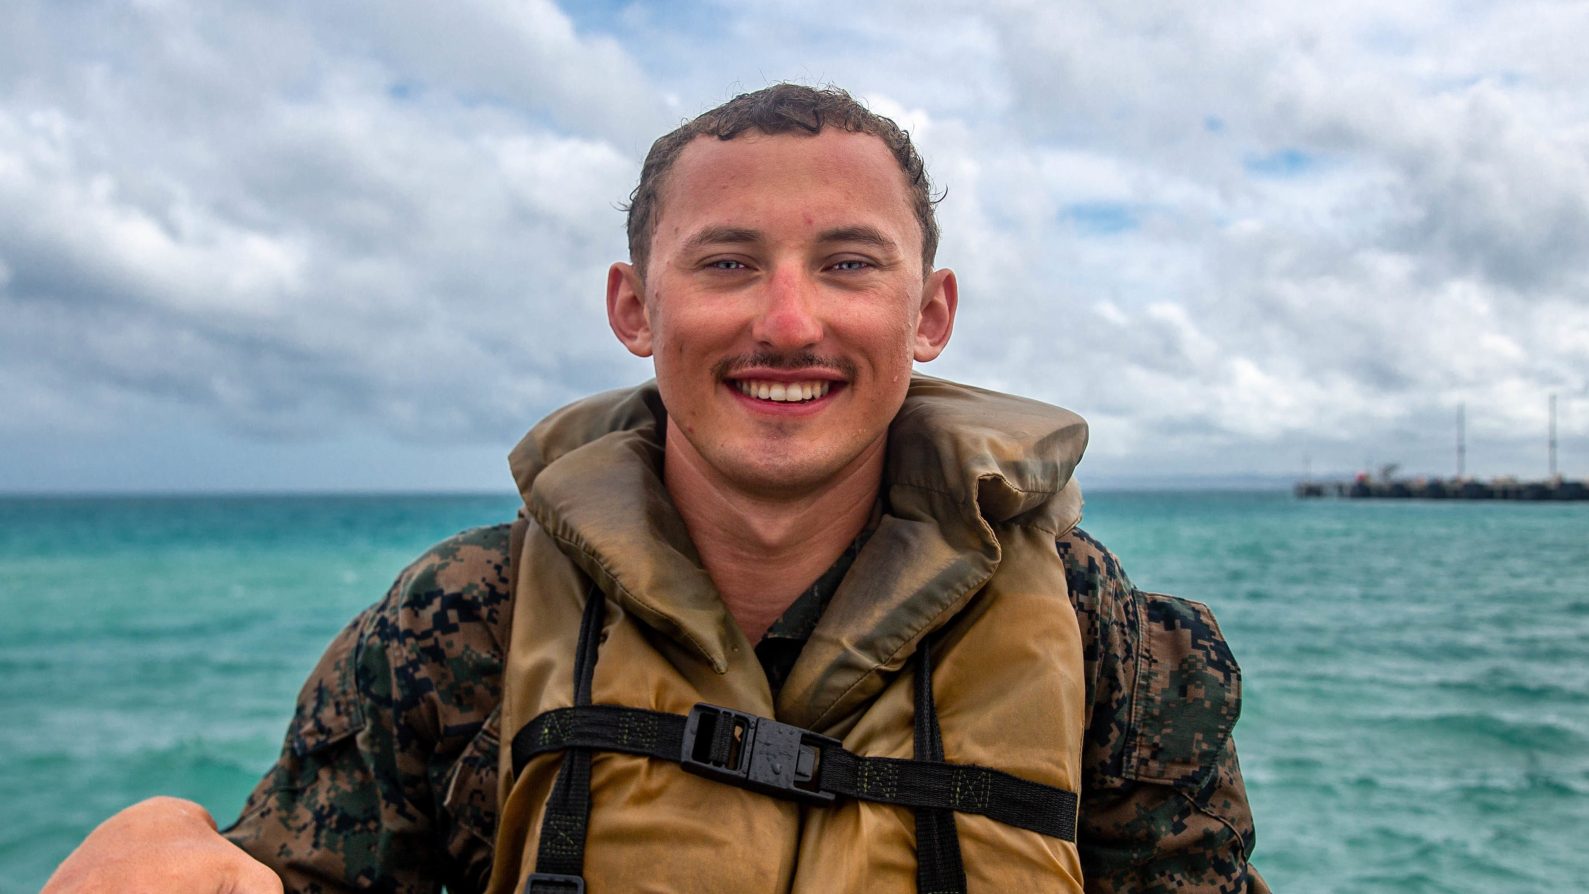 U.S. Marine Corps Sgt. Jerry Betzold, with 3rd Battalion, 4th Marine Regiment, 3rd Marine Division, trains in a coxswain course at White Beach Naval Facility, Okinawa, Japan, May 27, 2021. Betzold is a Avone, Ind. native. “This course allows for us to maintain our readiness for small boat handling tactics with Combat Rubber Raiding Crafts, and to be able to raid beach landing sites effectively and swiftly.” Trainings like these allow Marines to continually develop their maritime skillset to ensure III Marine Expeditionary Force remains a ready force in the Indo-Pacific. (U.S. Marine Corps photo by Cpl. Sarah Marshall)